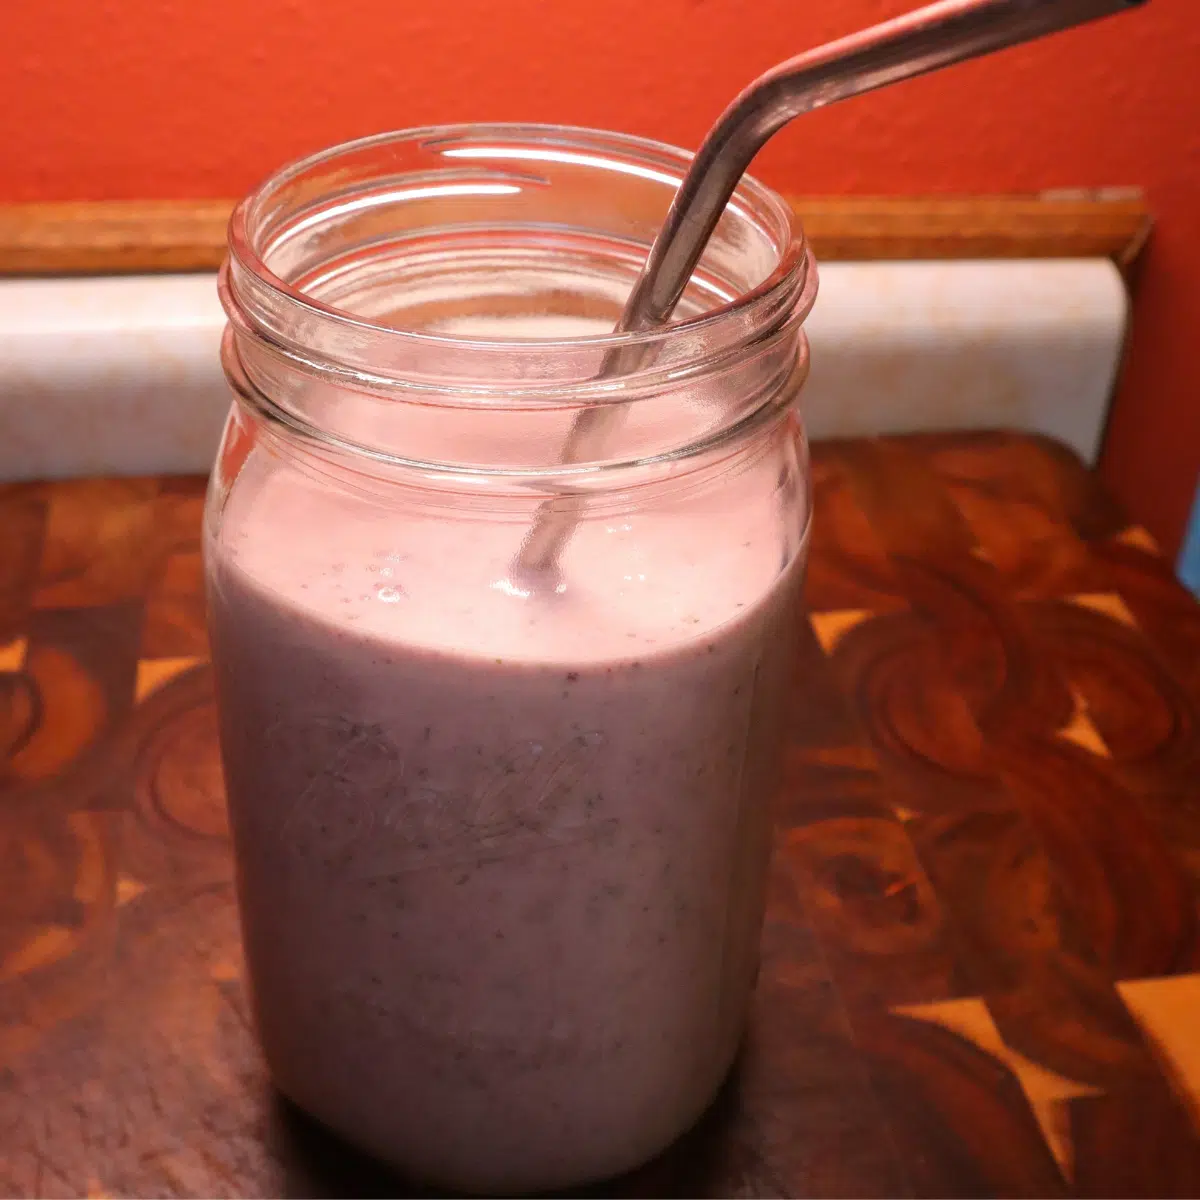 How To Make a Healthy Mixed Berry Smoothie